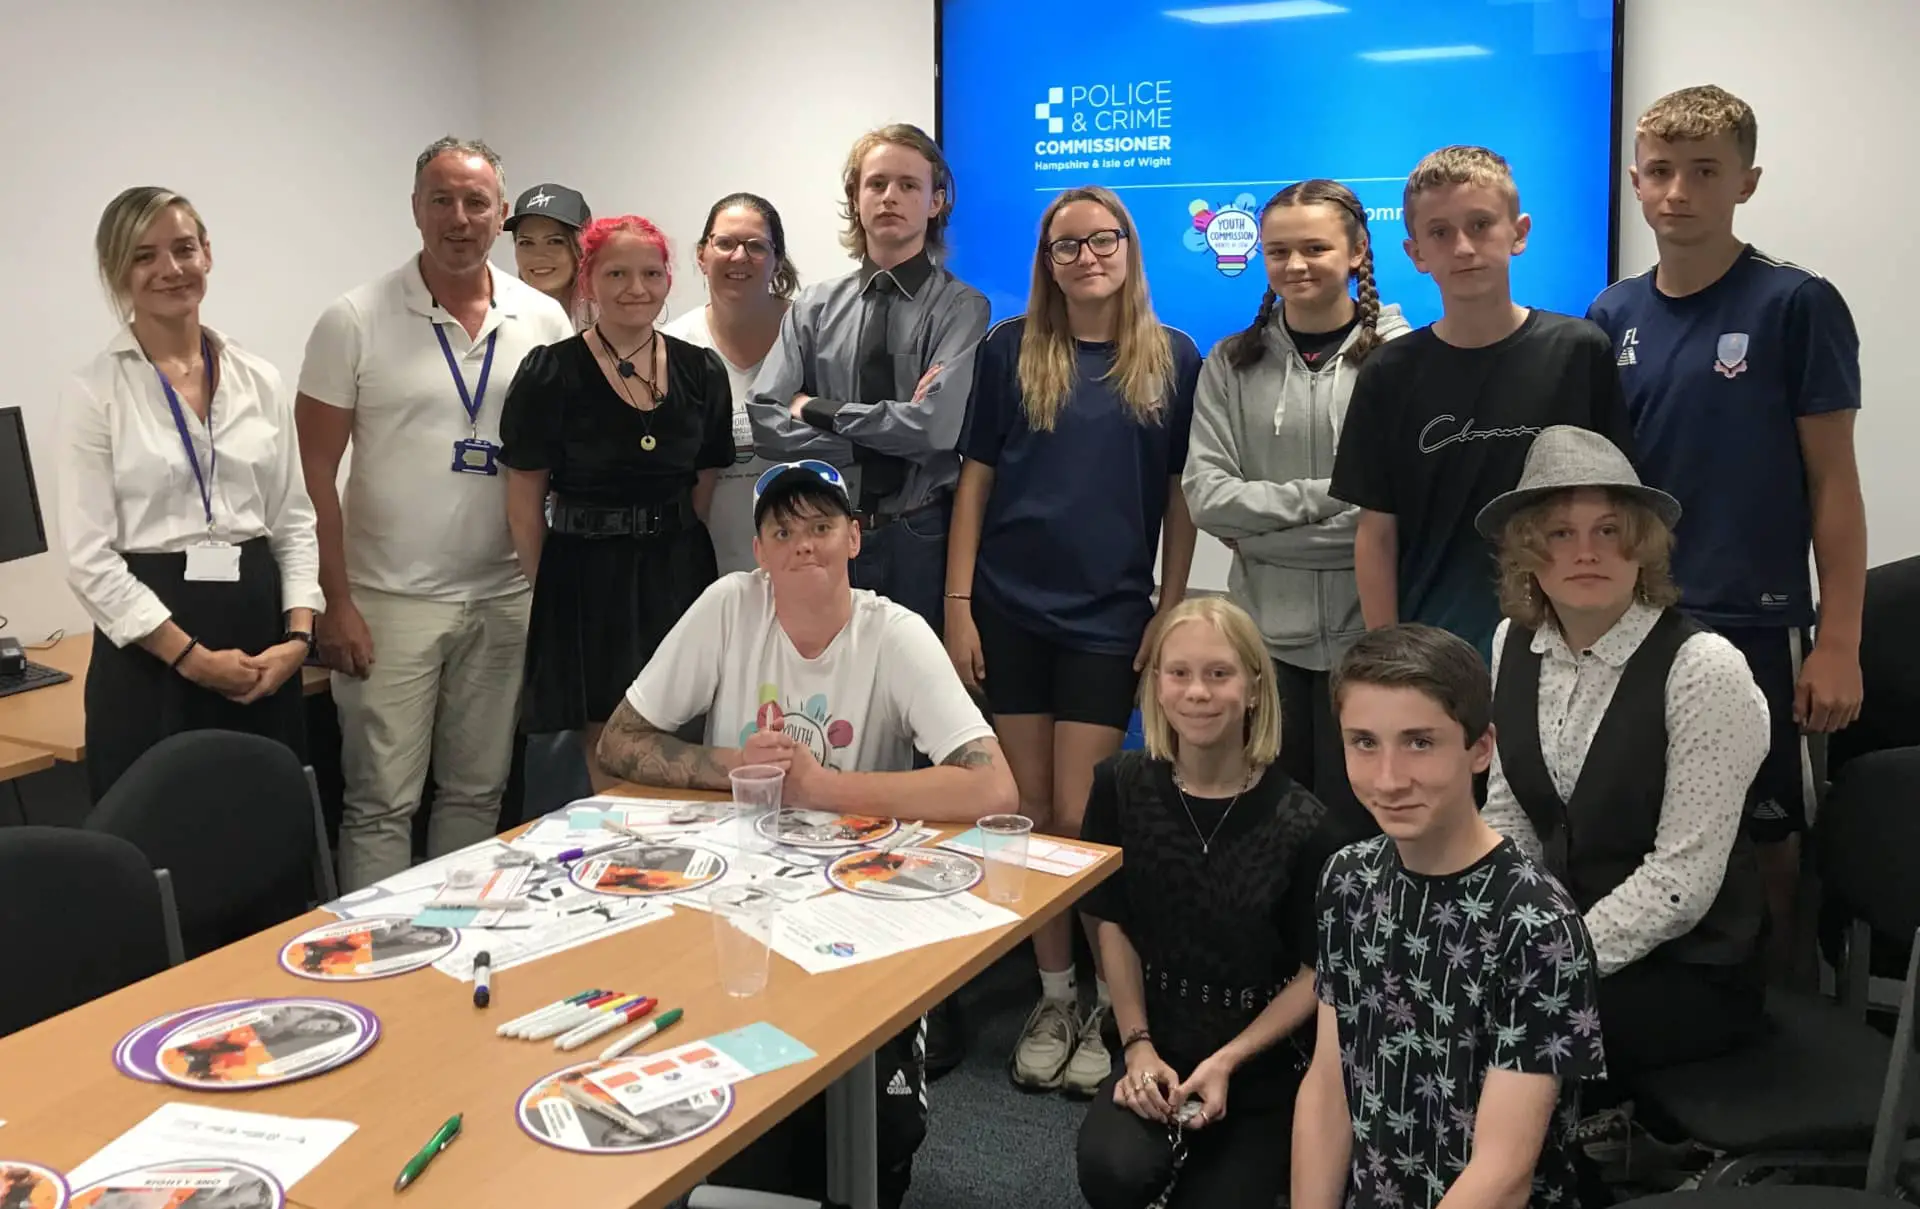 members of the Sandown and Lake Youth Forum at a recent meeting with Hampshire Police & Crime Commissioner’s Youth Commission